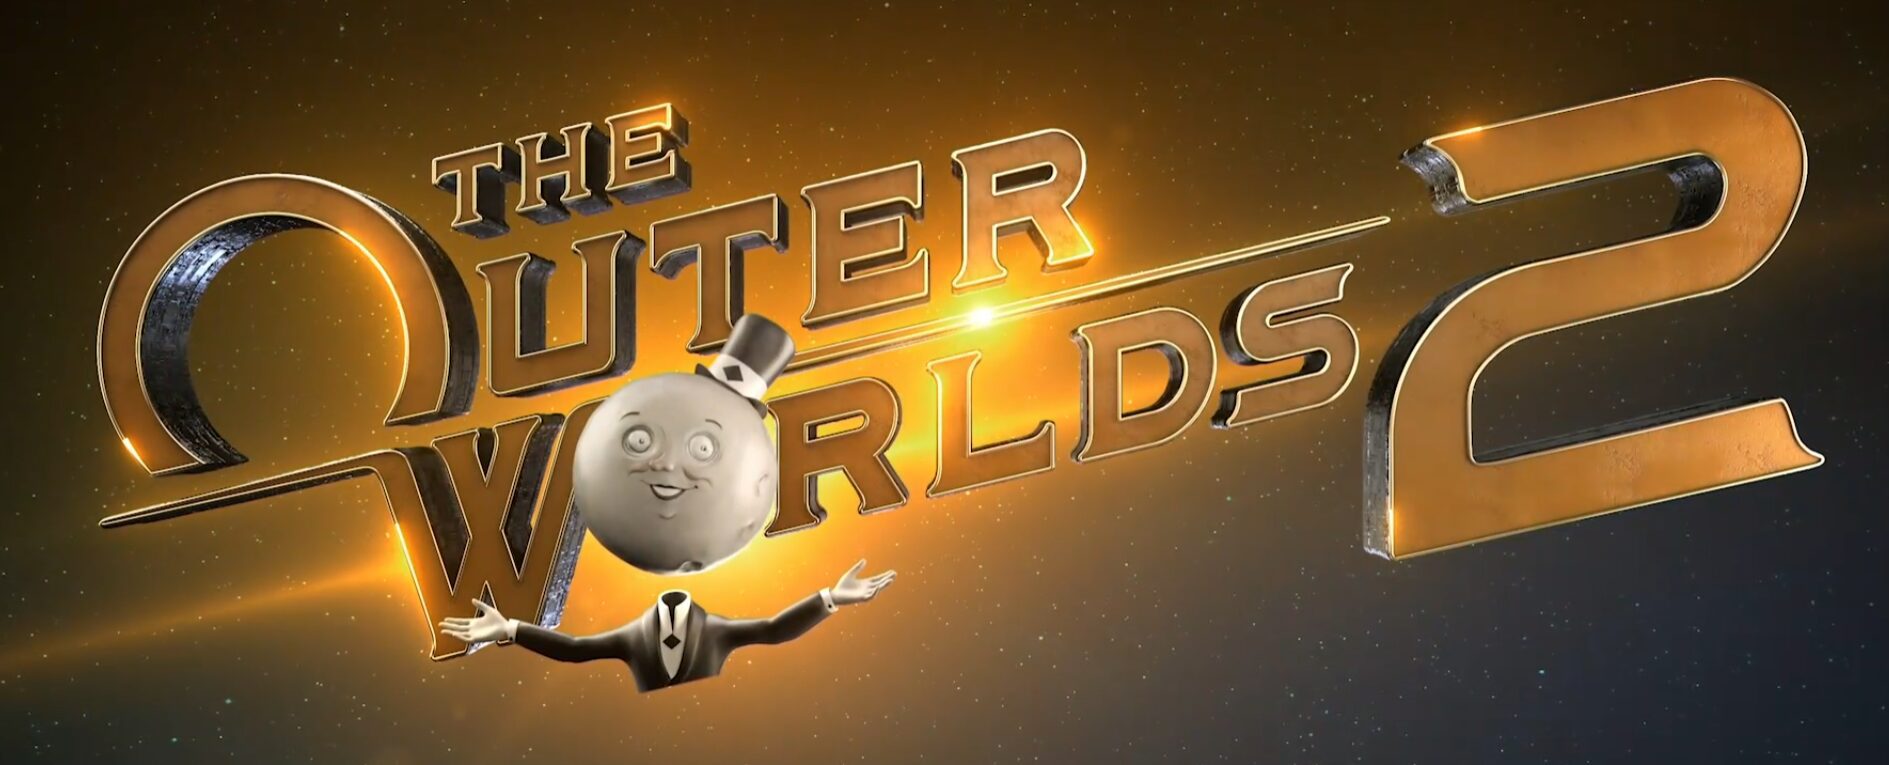 The Outer Worlds 2 logo